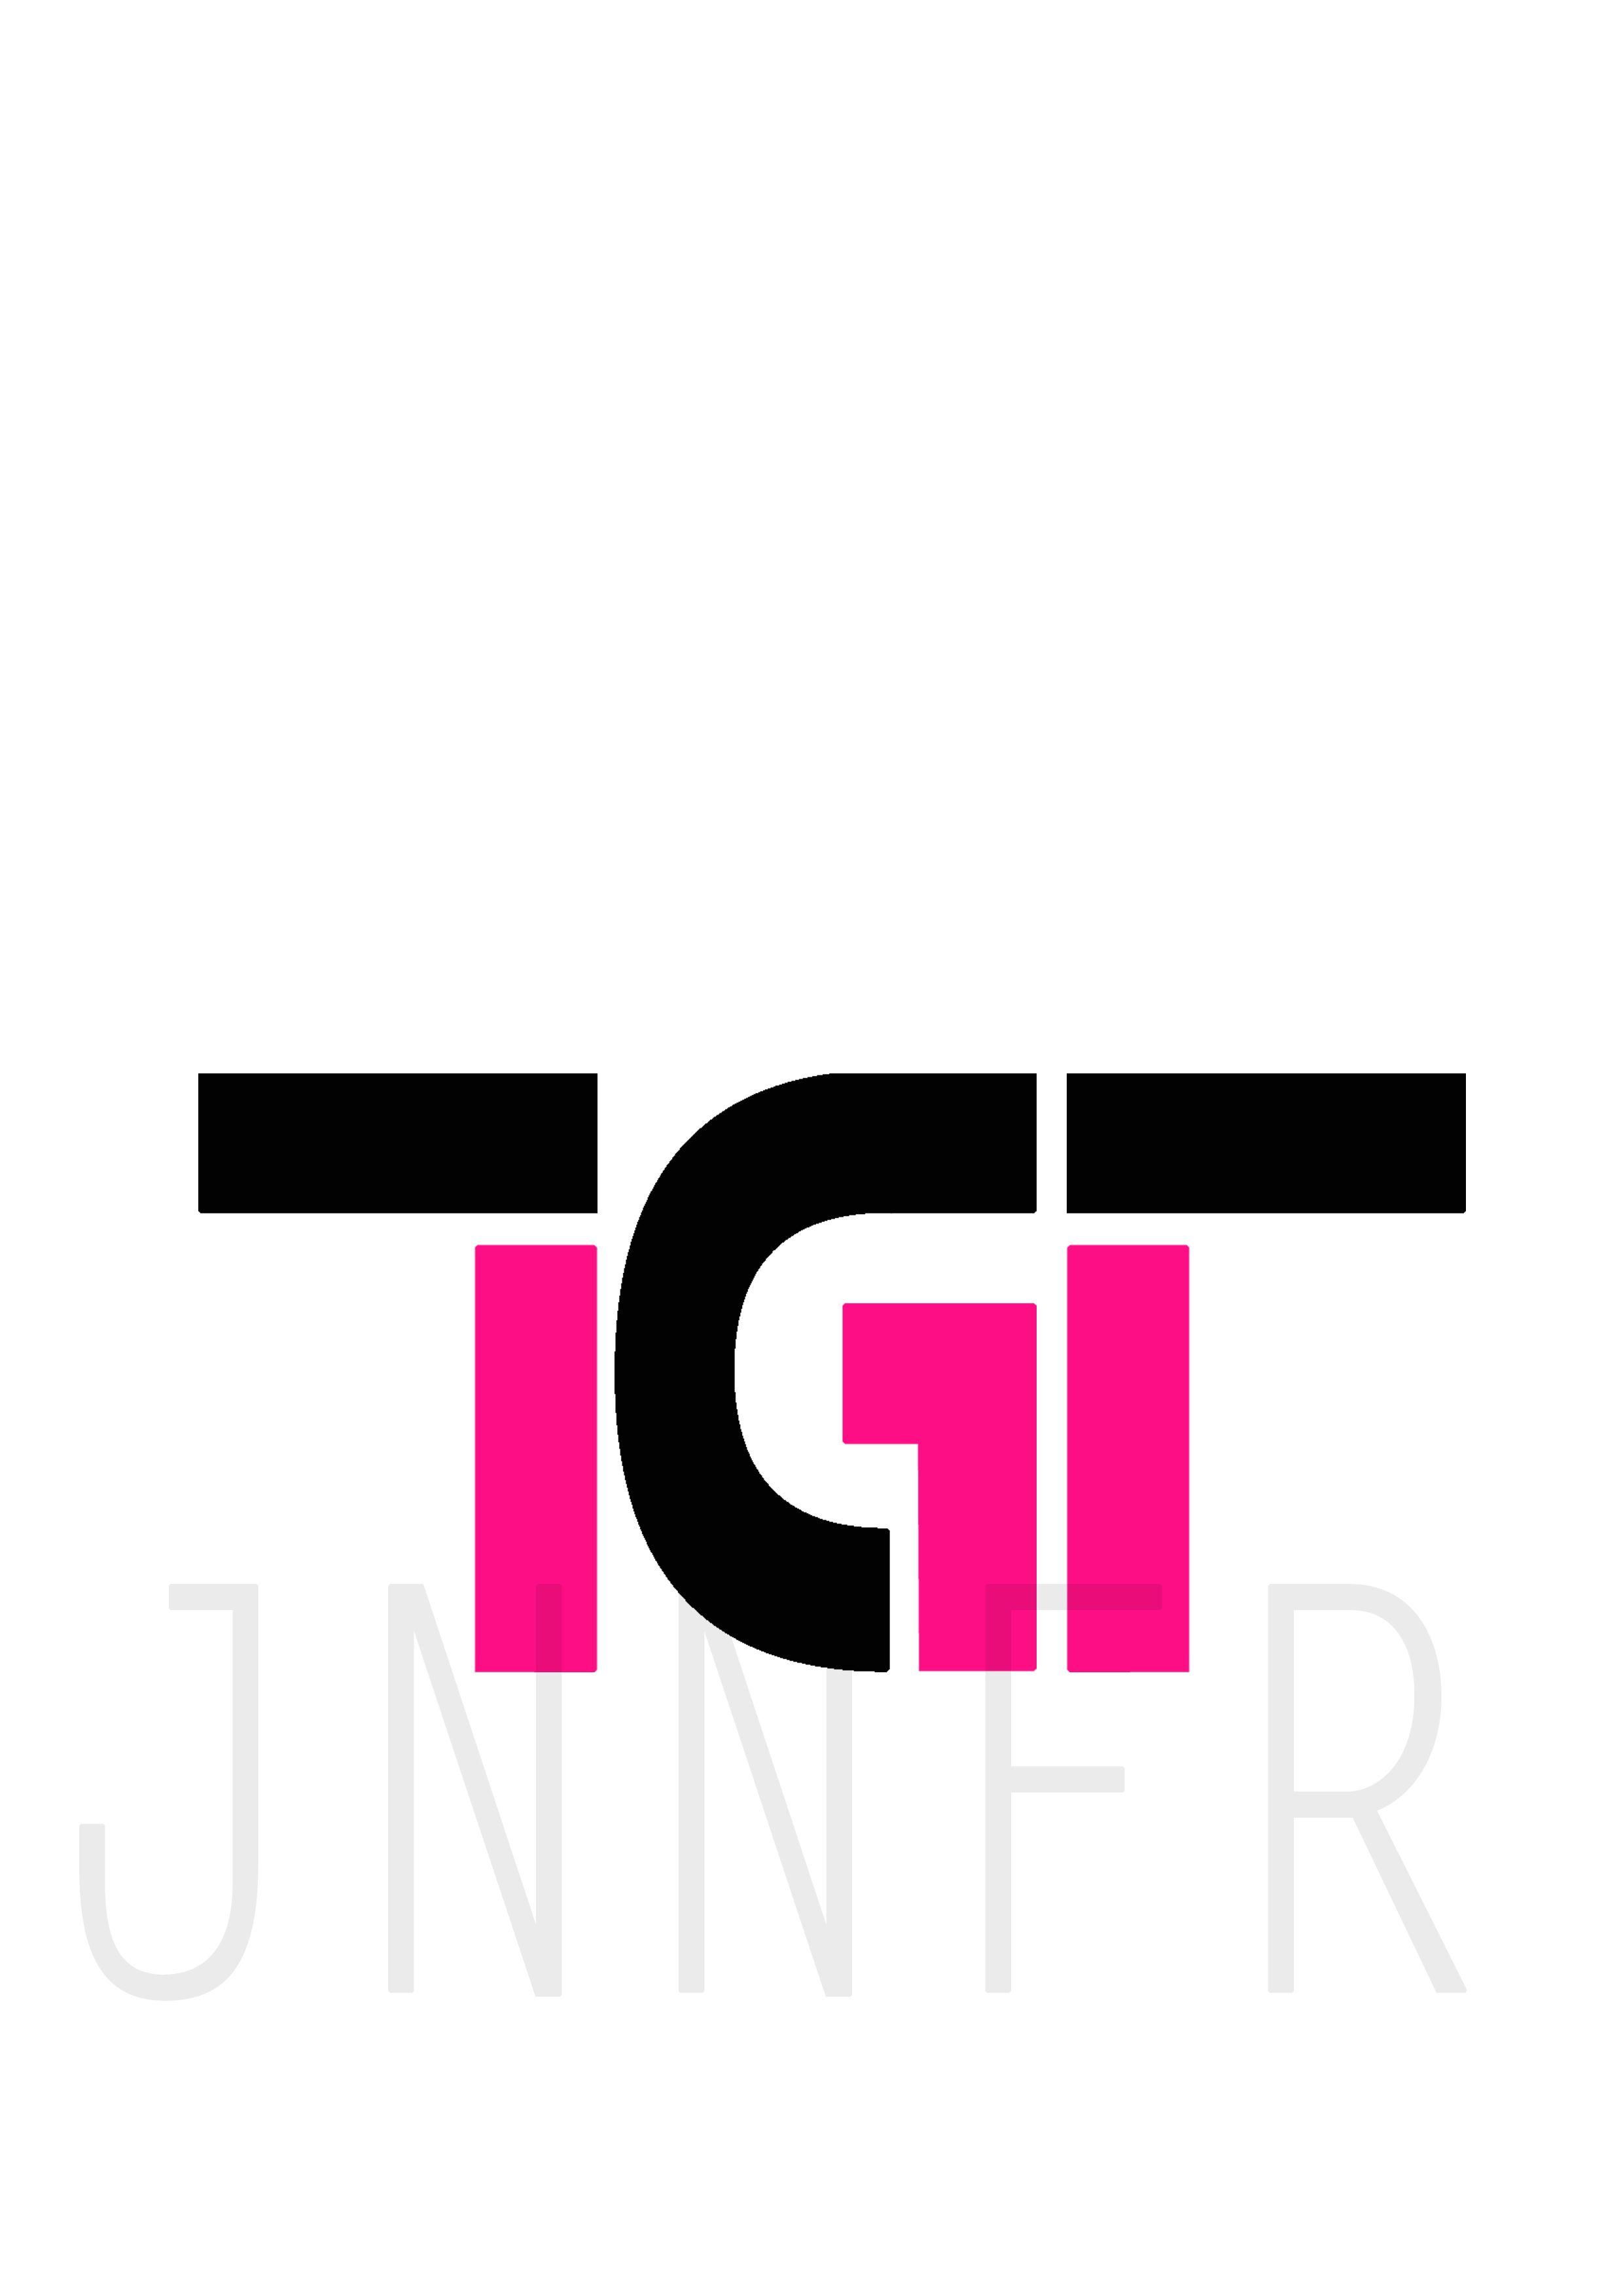 TGT Logo - New logo for Tryna Get There! | Studio JNNFR